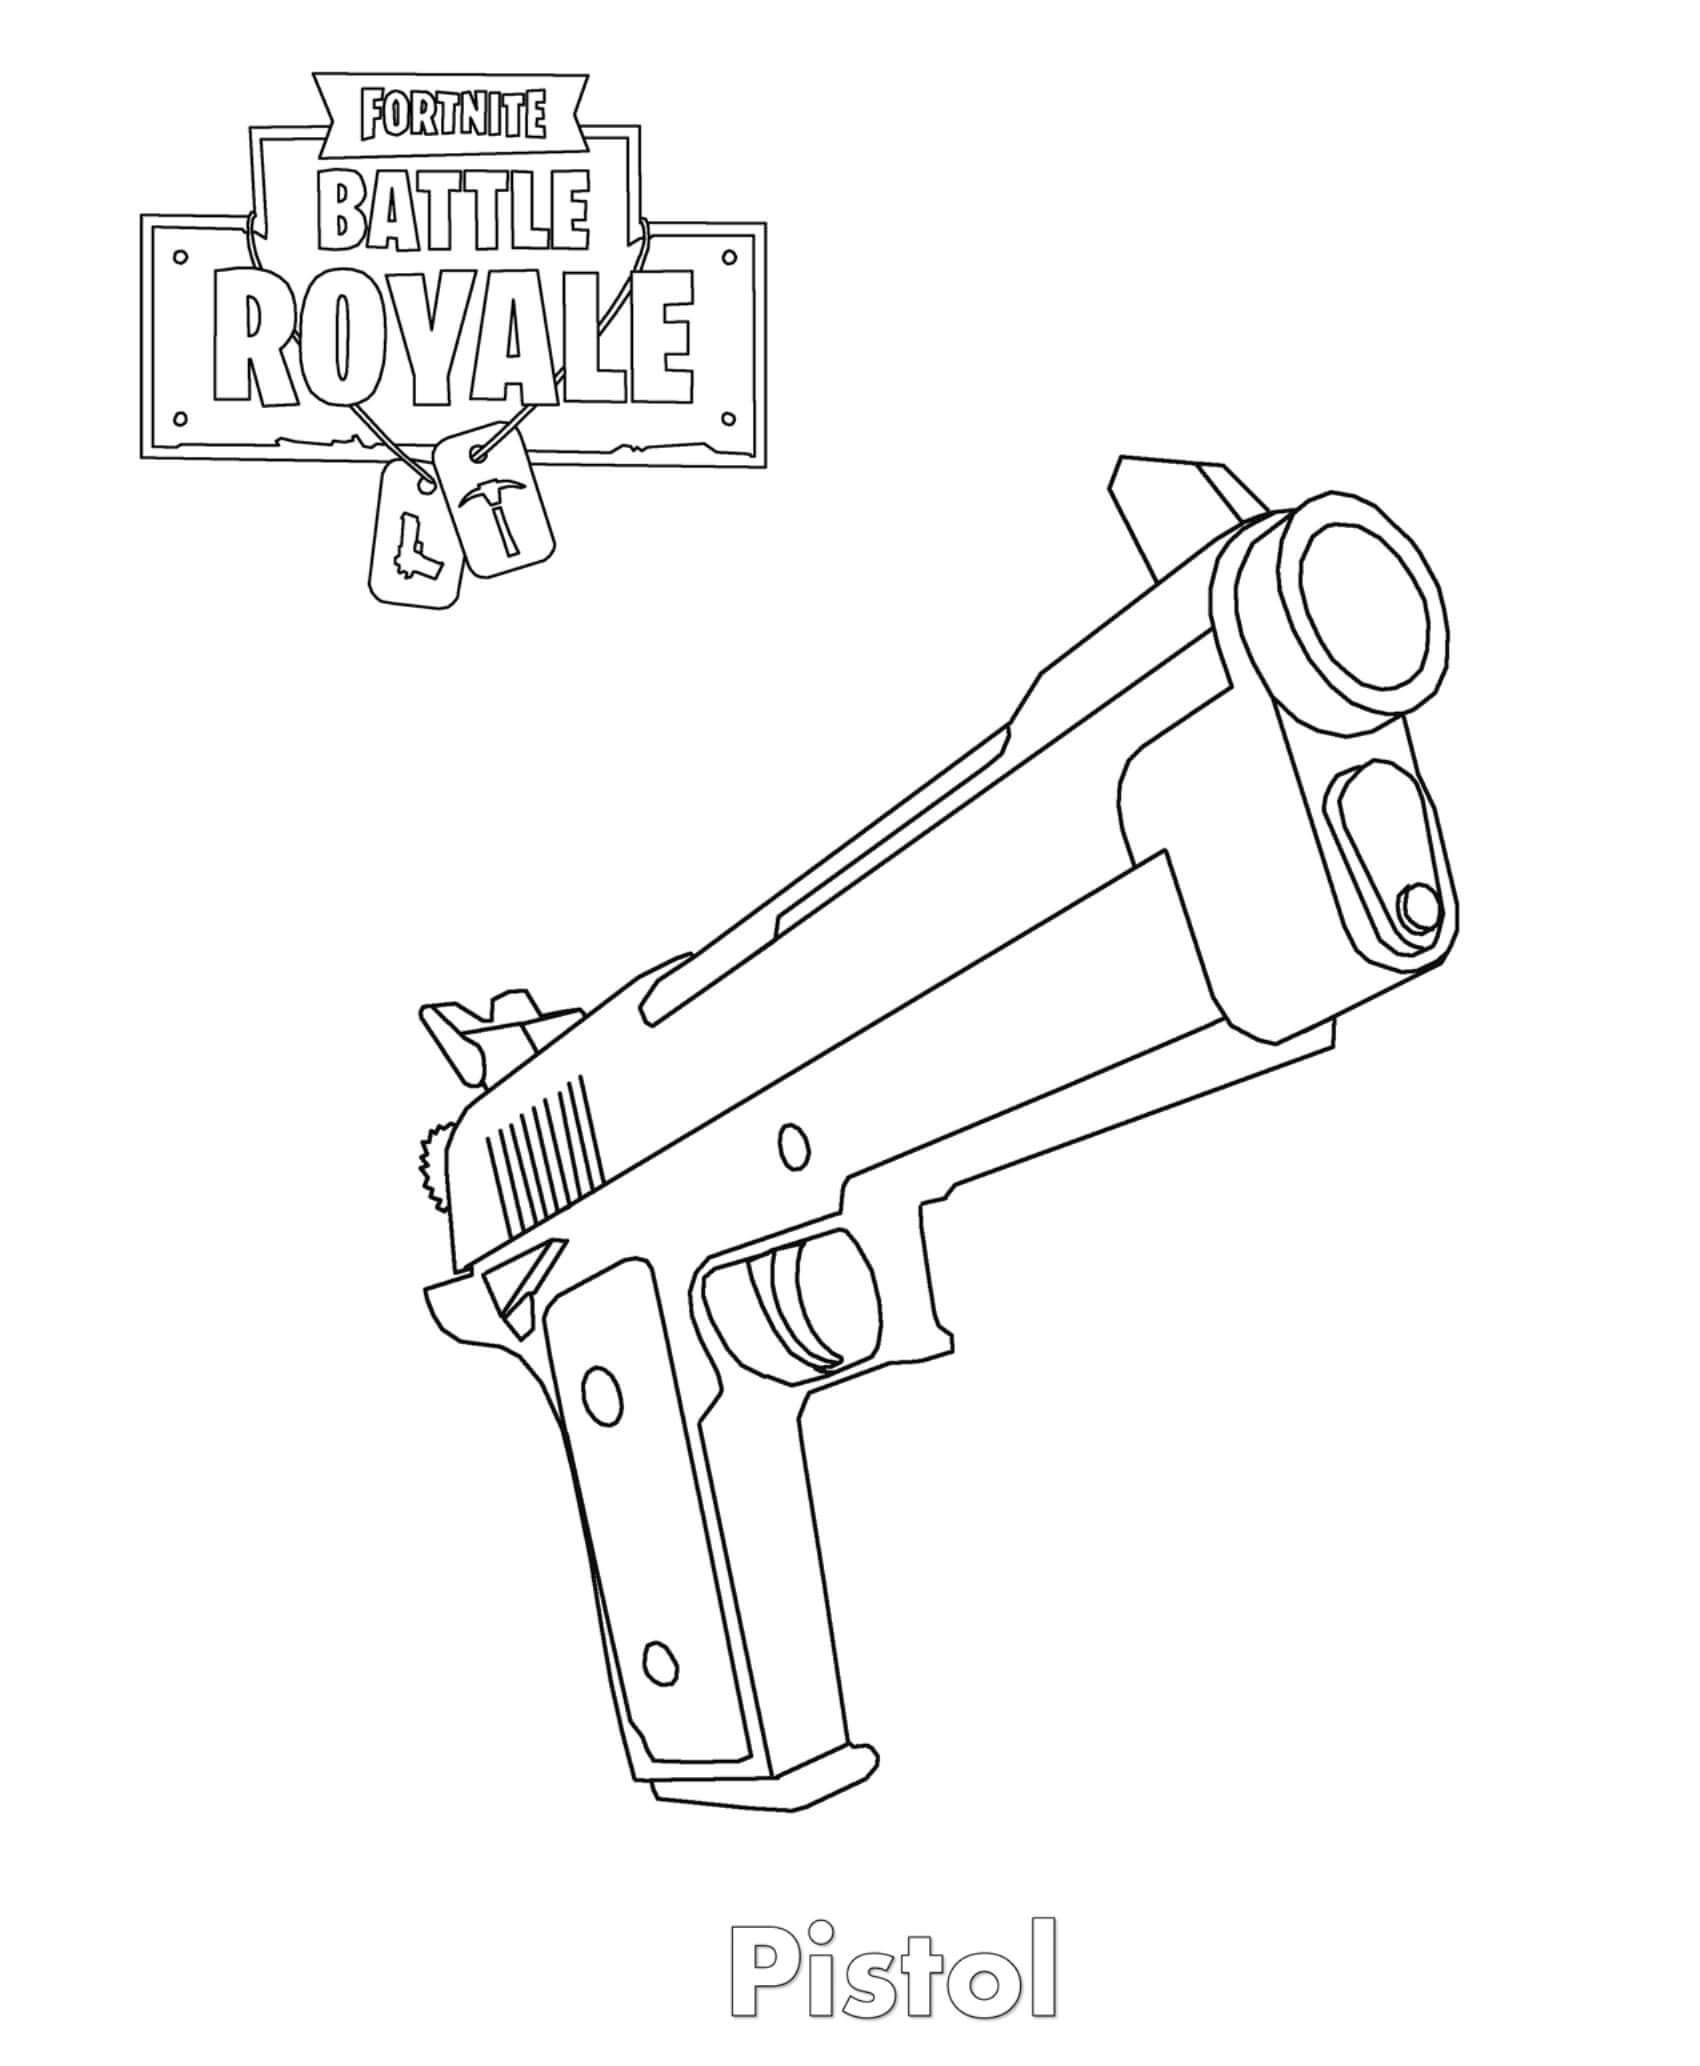 Free Easy Fortnite Skin Coloring Pages Pistol for Kids printable